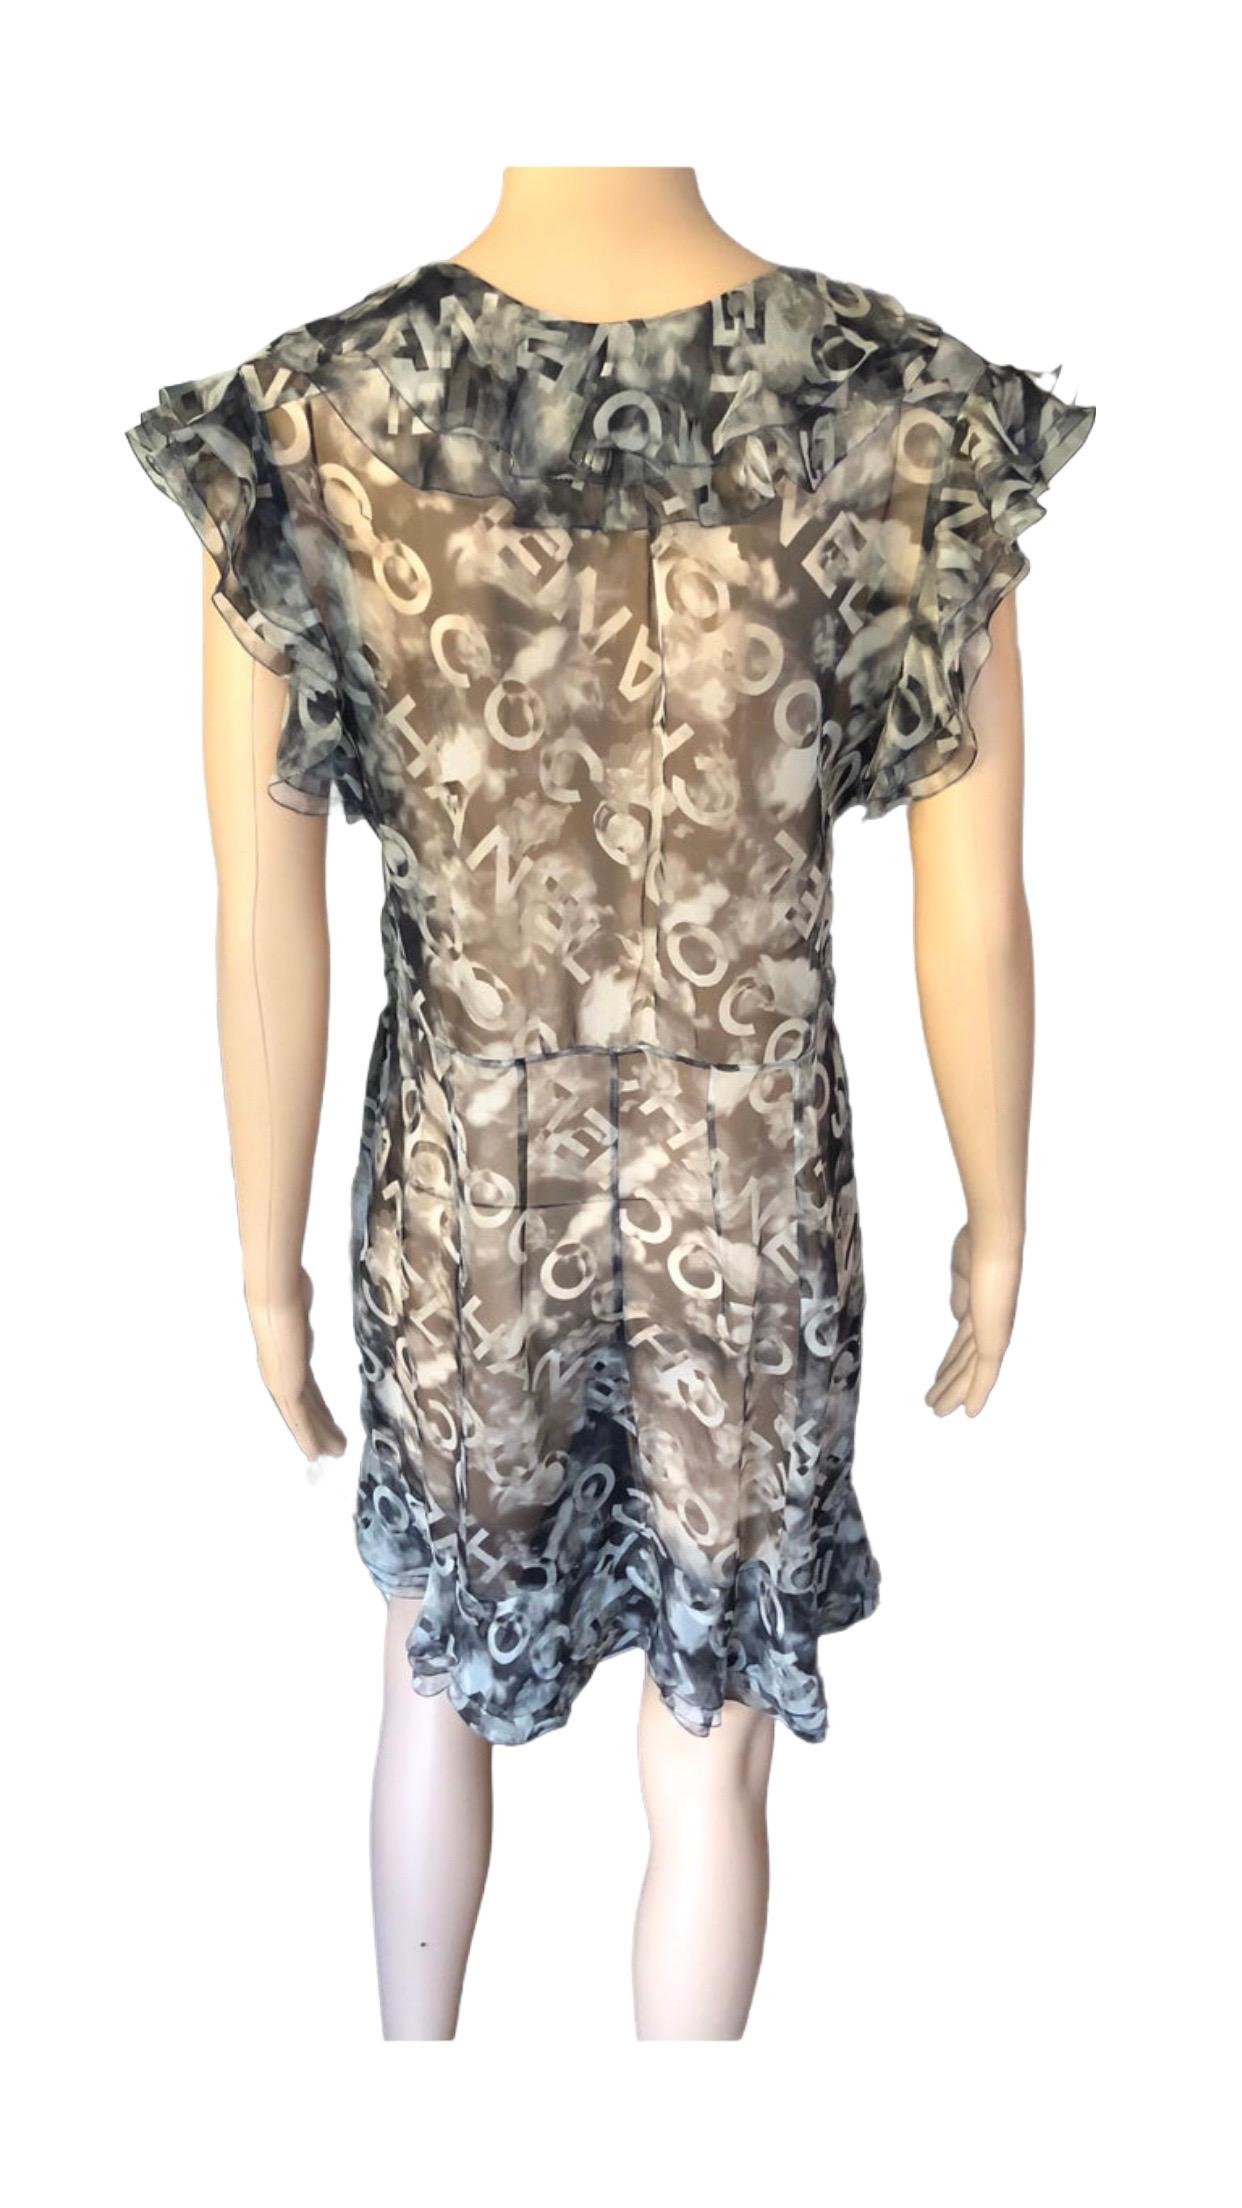 Chanel S/S 2002 Logo Monogram Sheer Plunging Silk Tunic Dress For Sale 5